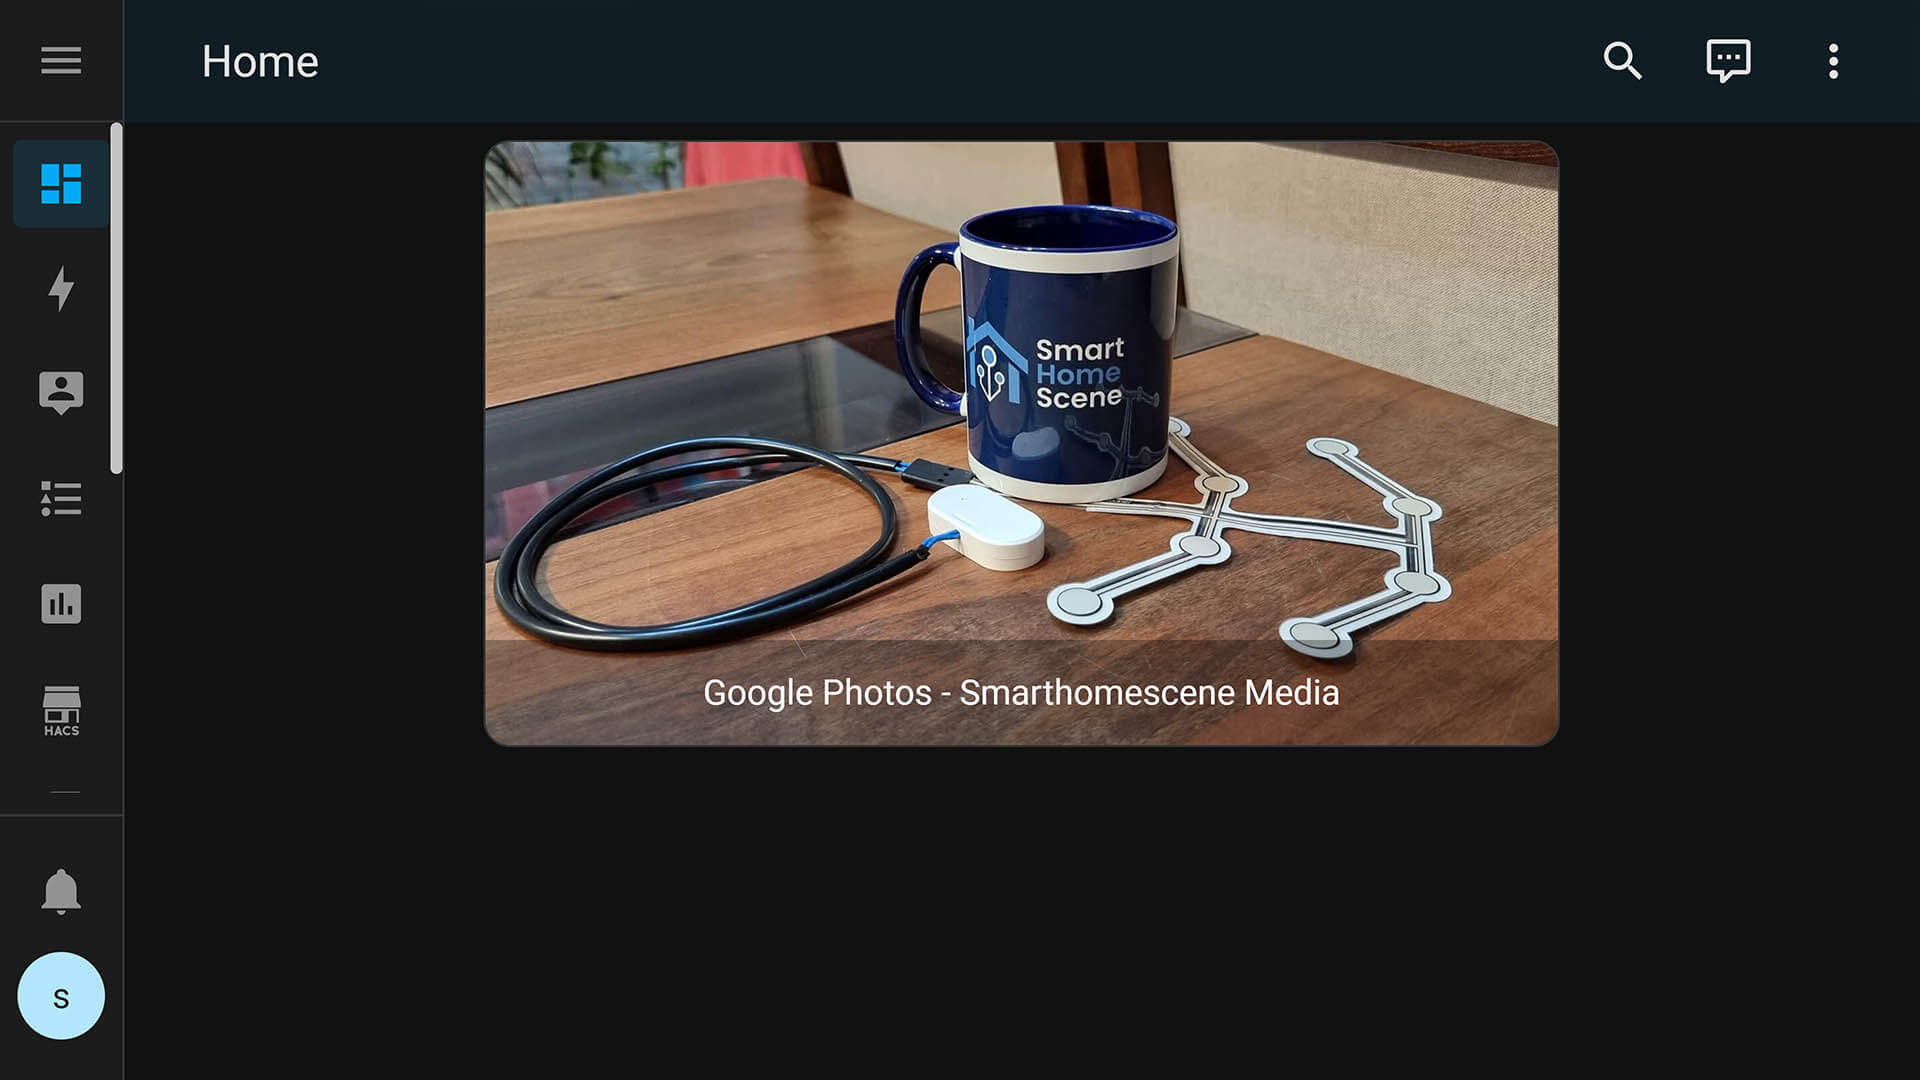 Google Photos Home Assistant Picture Entity Card